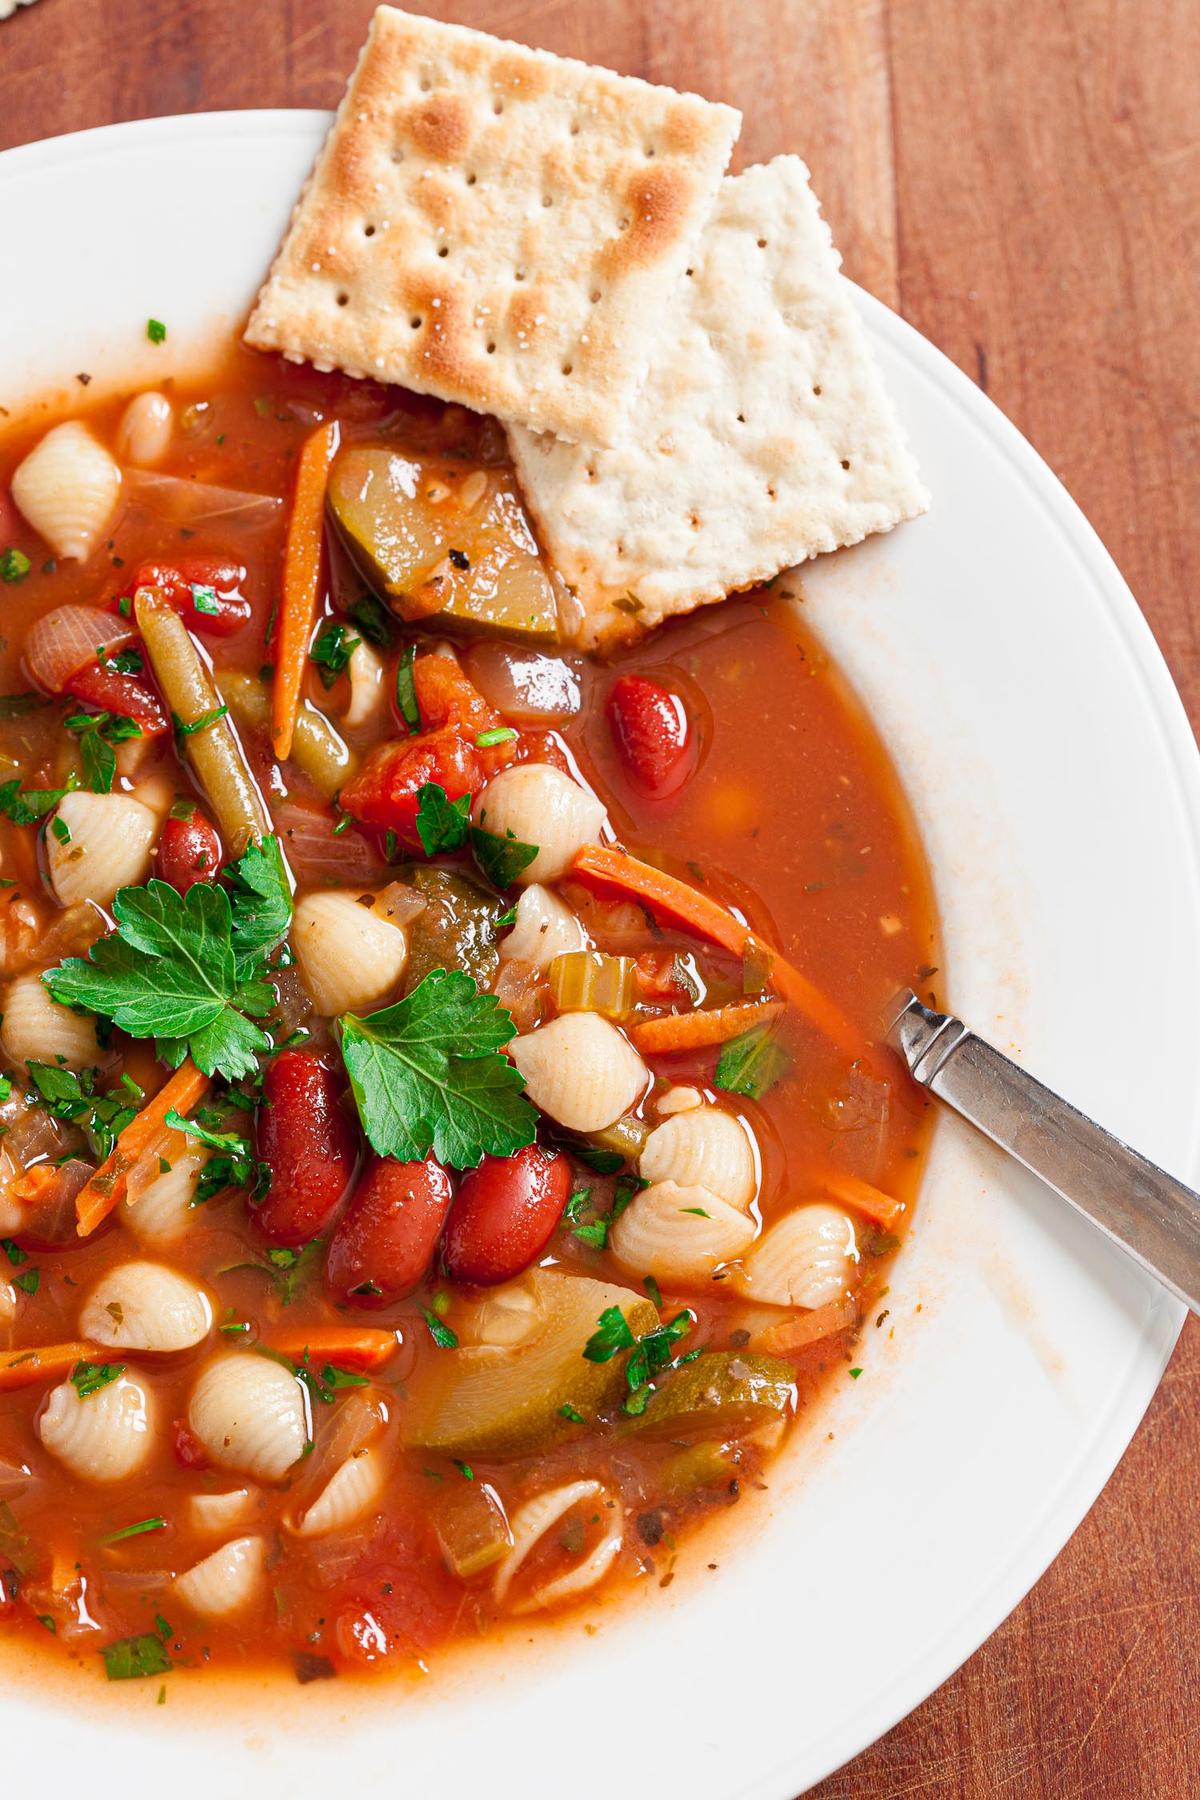 This minestrone soup is fabulous as it is, but feel free to vary it up based on what you have on hand. (Courtesy of Amy Dong)